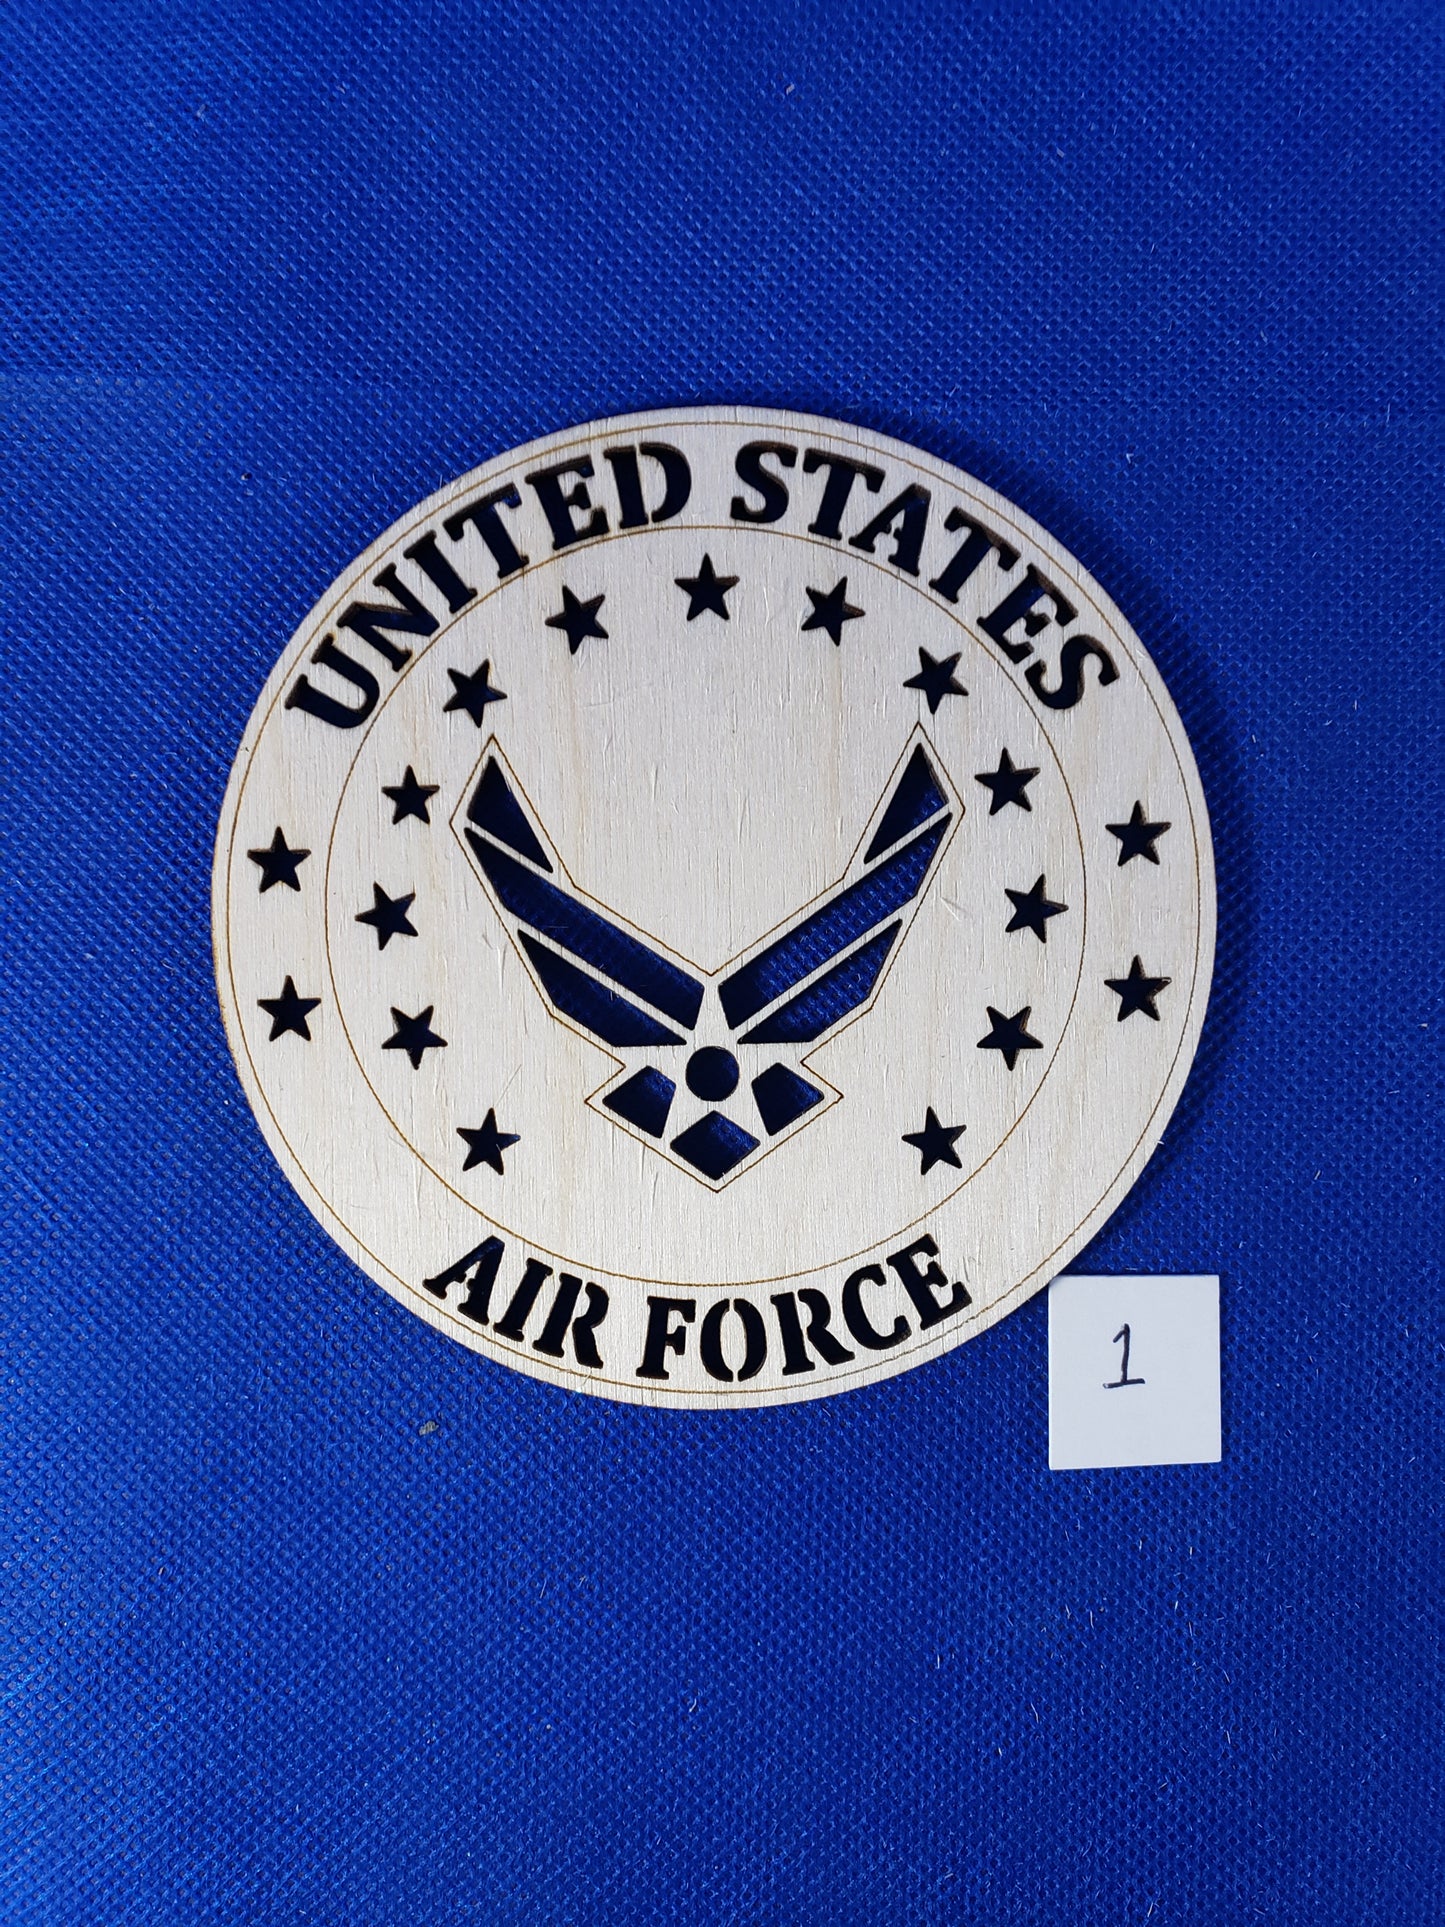 US Air Force - Laser cut natural wooden blanks